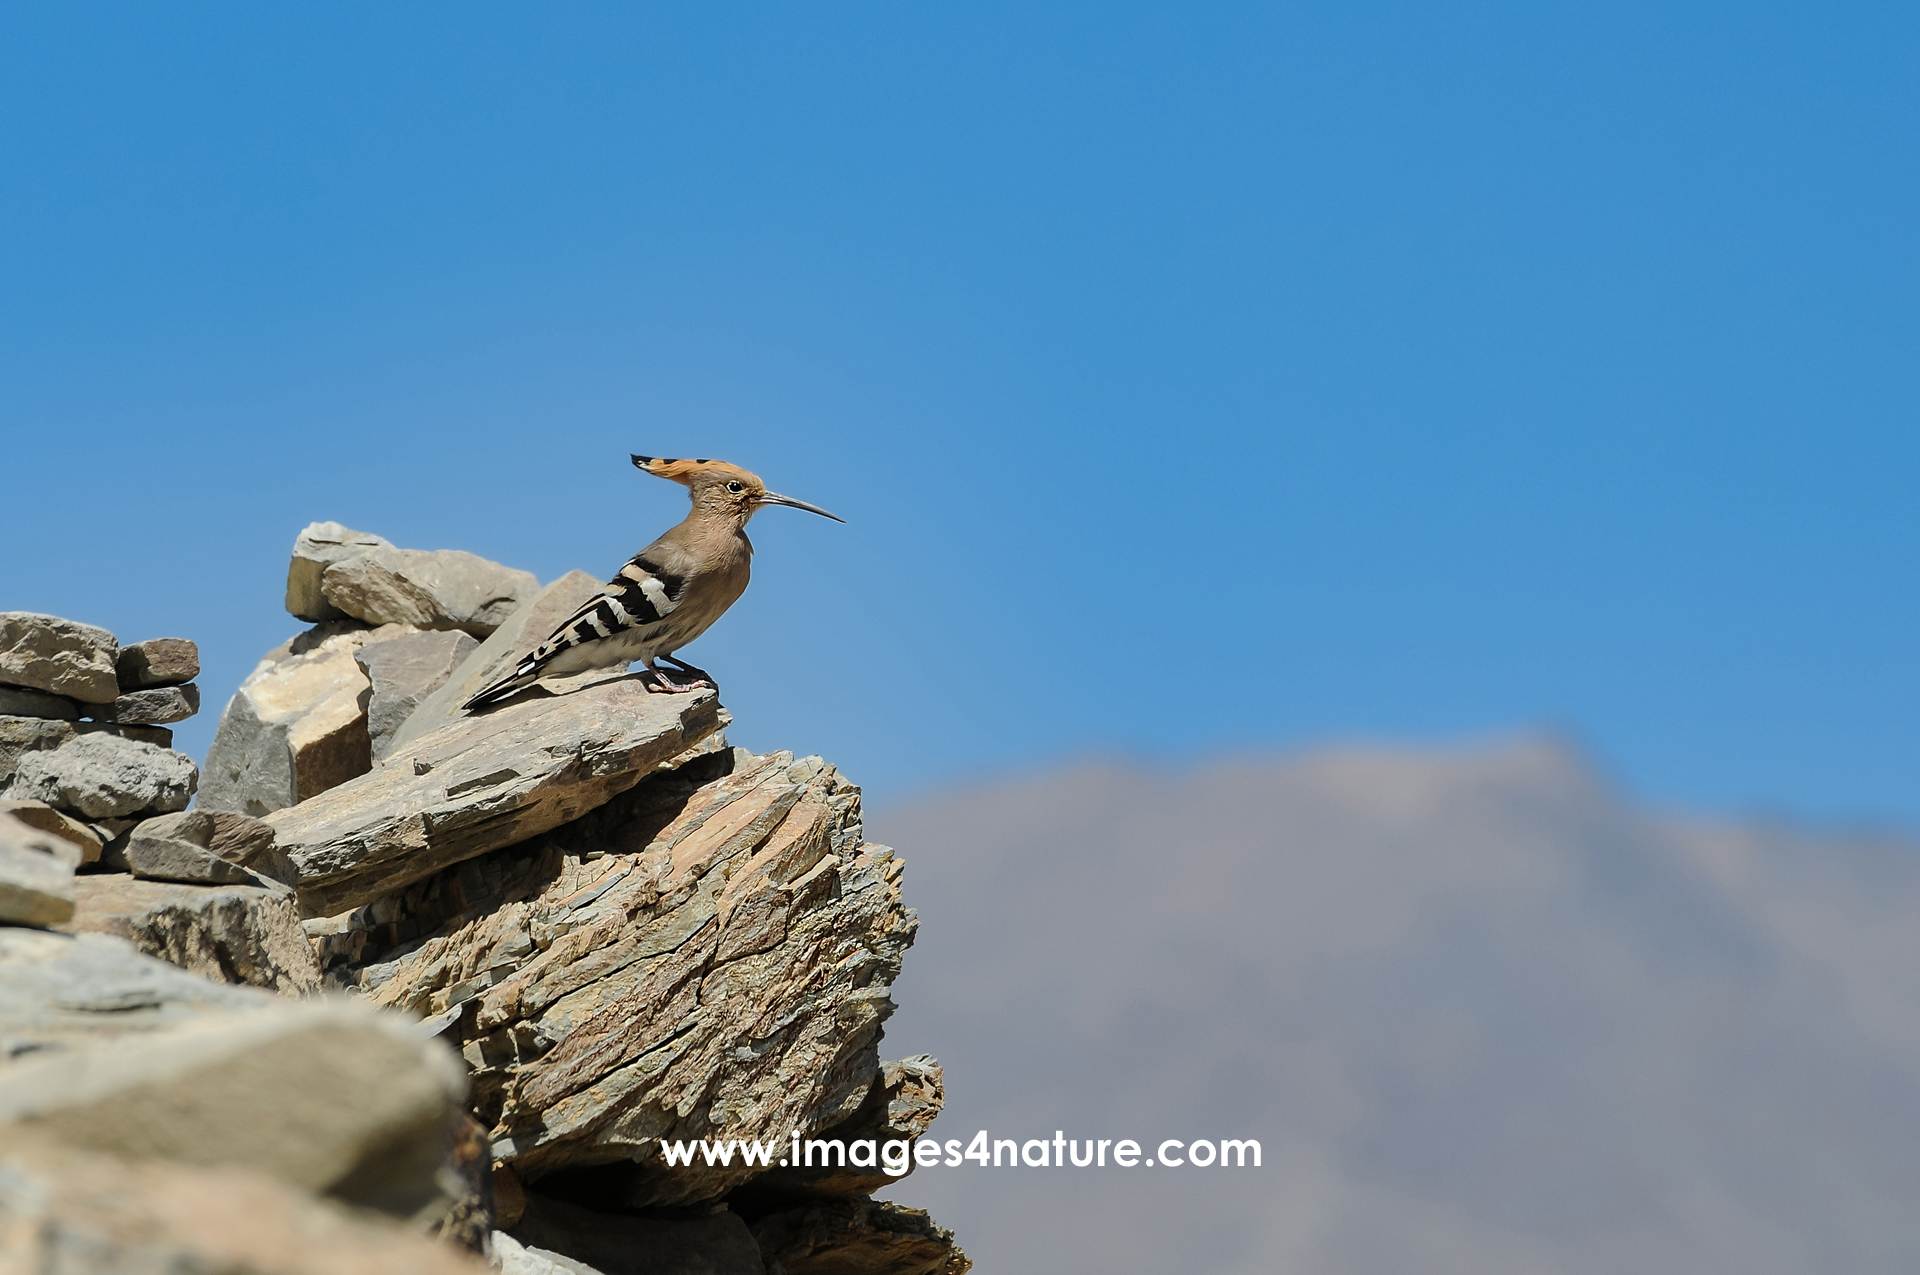 Side-view of one Eurasian hoopoe sitting on rocks on top of mountain